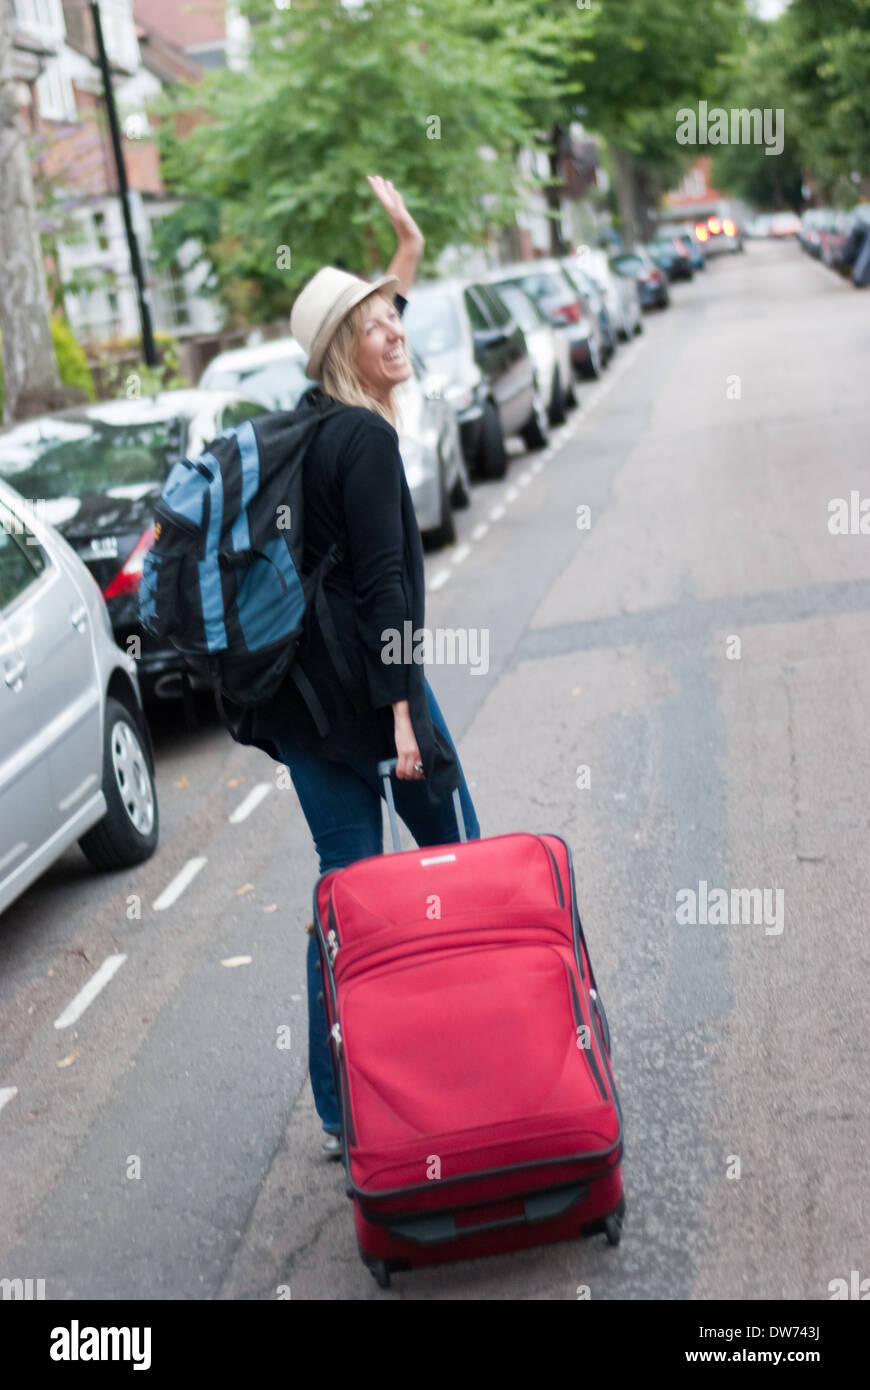 A traveler wheels her suitcase down a street in Chiswick in west London in the UK. Stock Photo